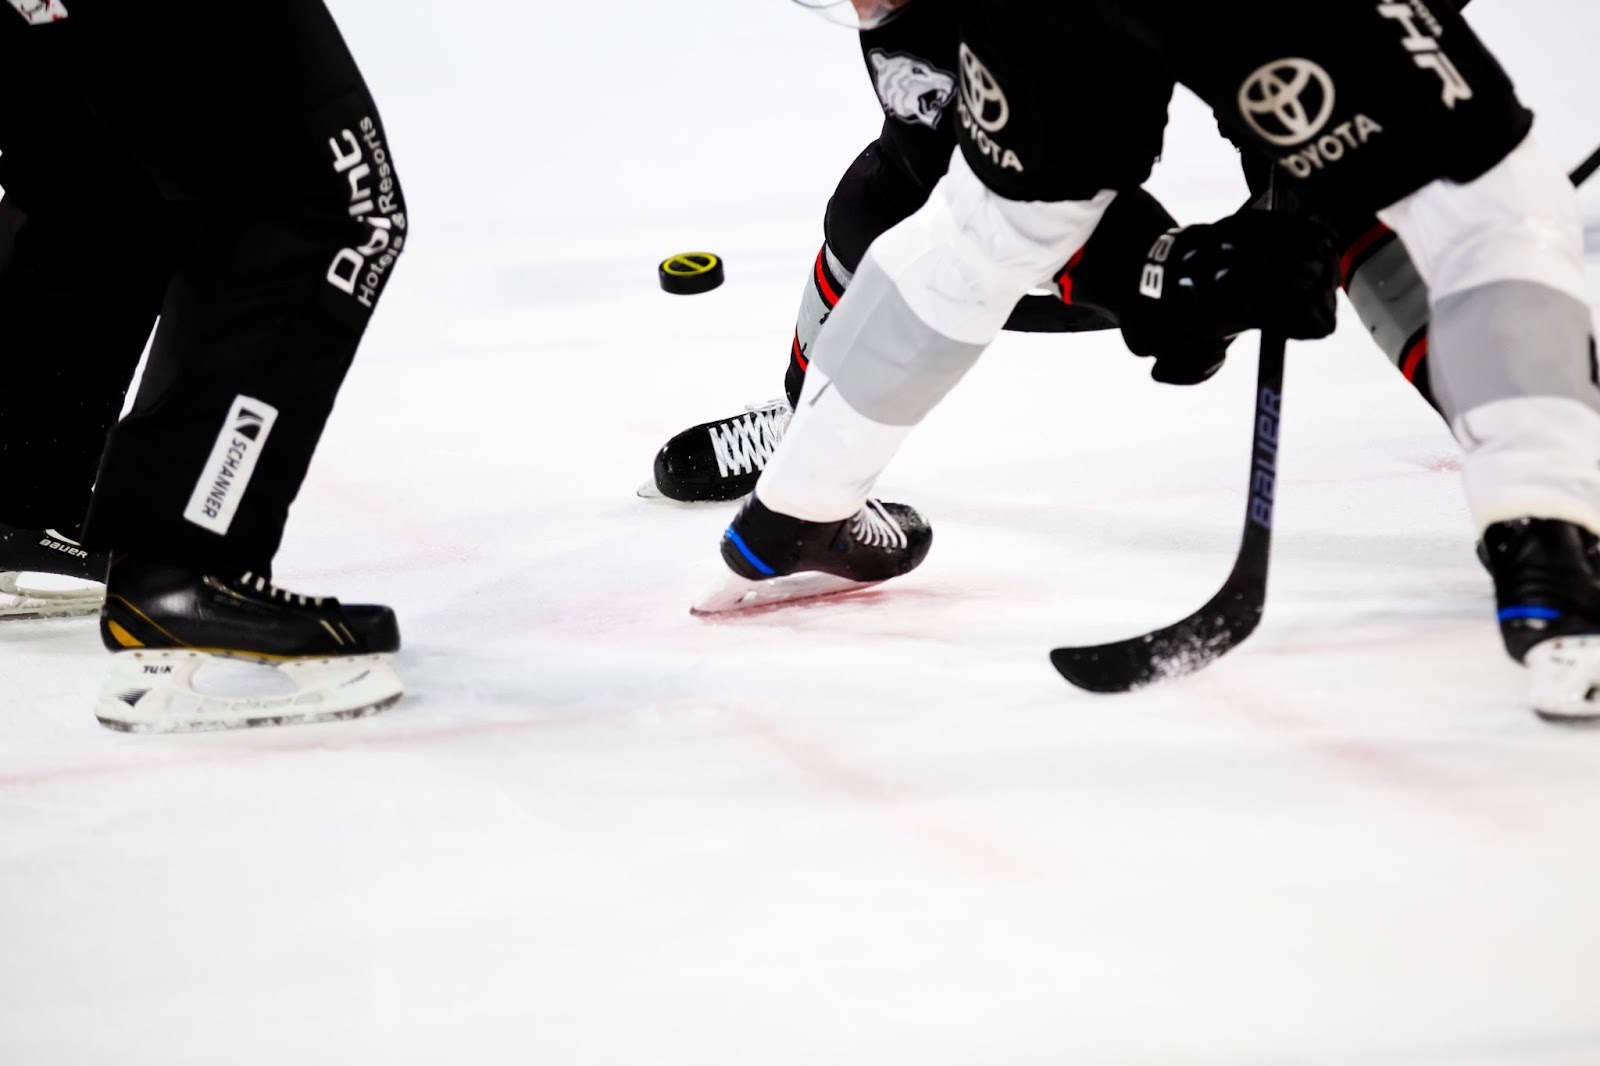 a closeup action shot of two hockey players and one referee's ice skates, with a stick and puck on the ice 